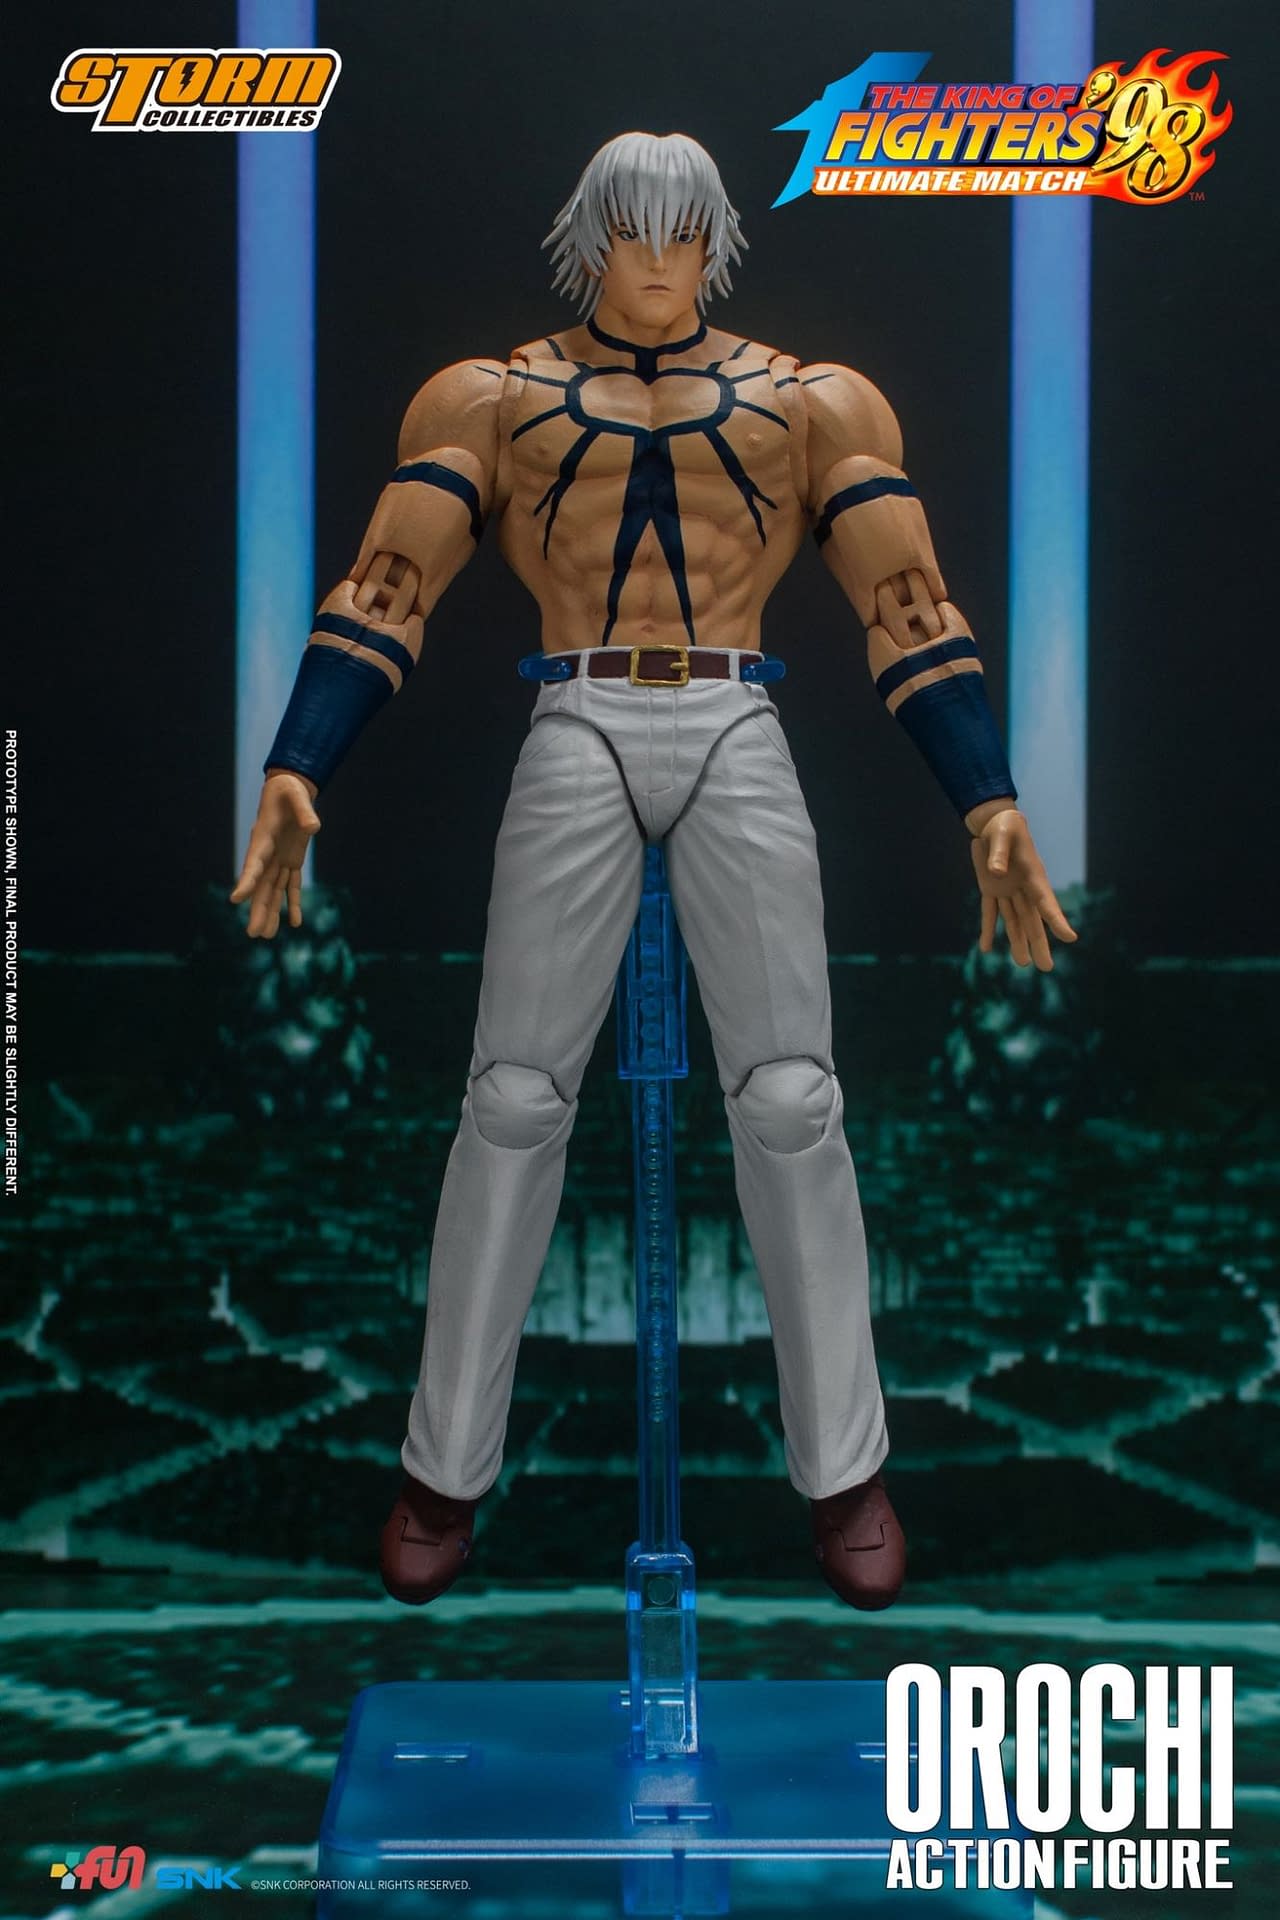 King of Fighters 98 Ultimate Match Orochi Arrives from Storm Collectibles